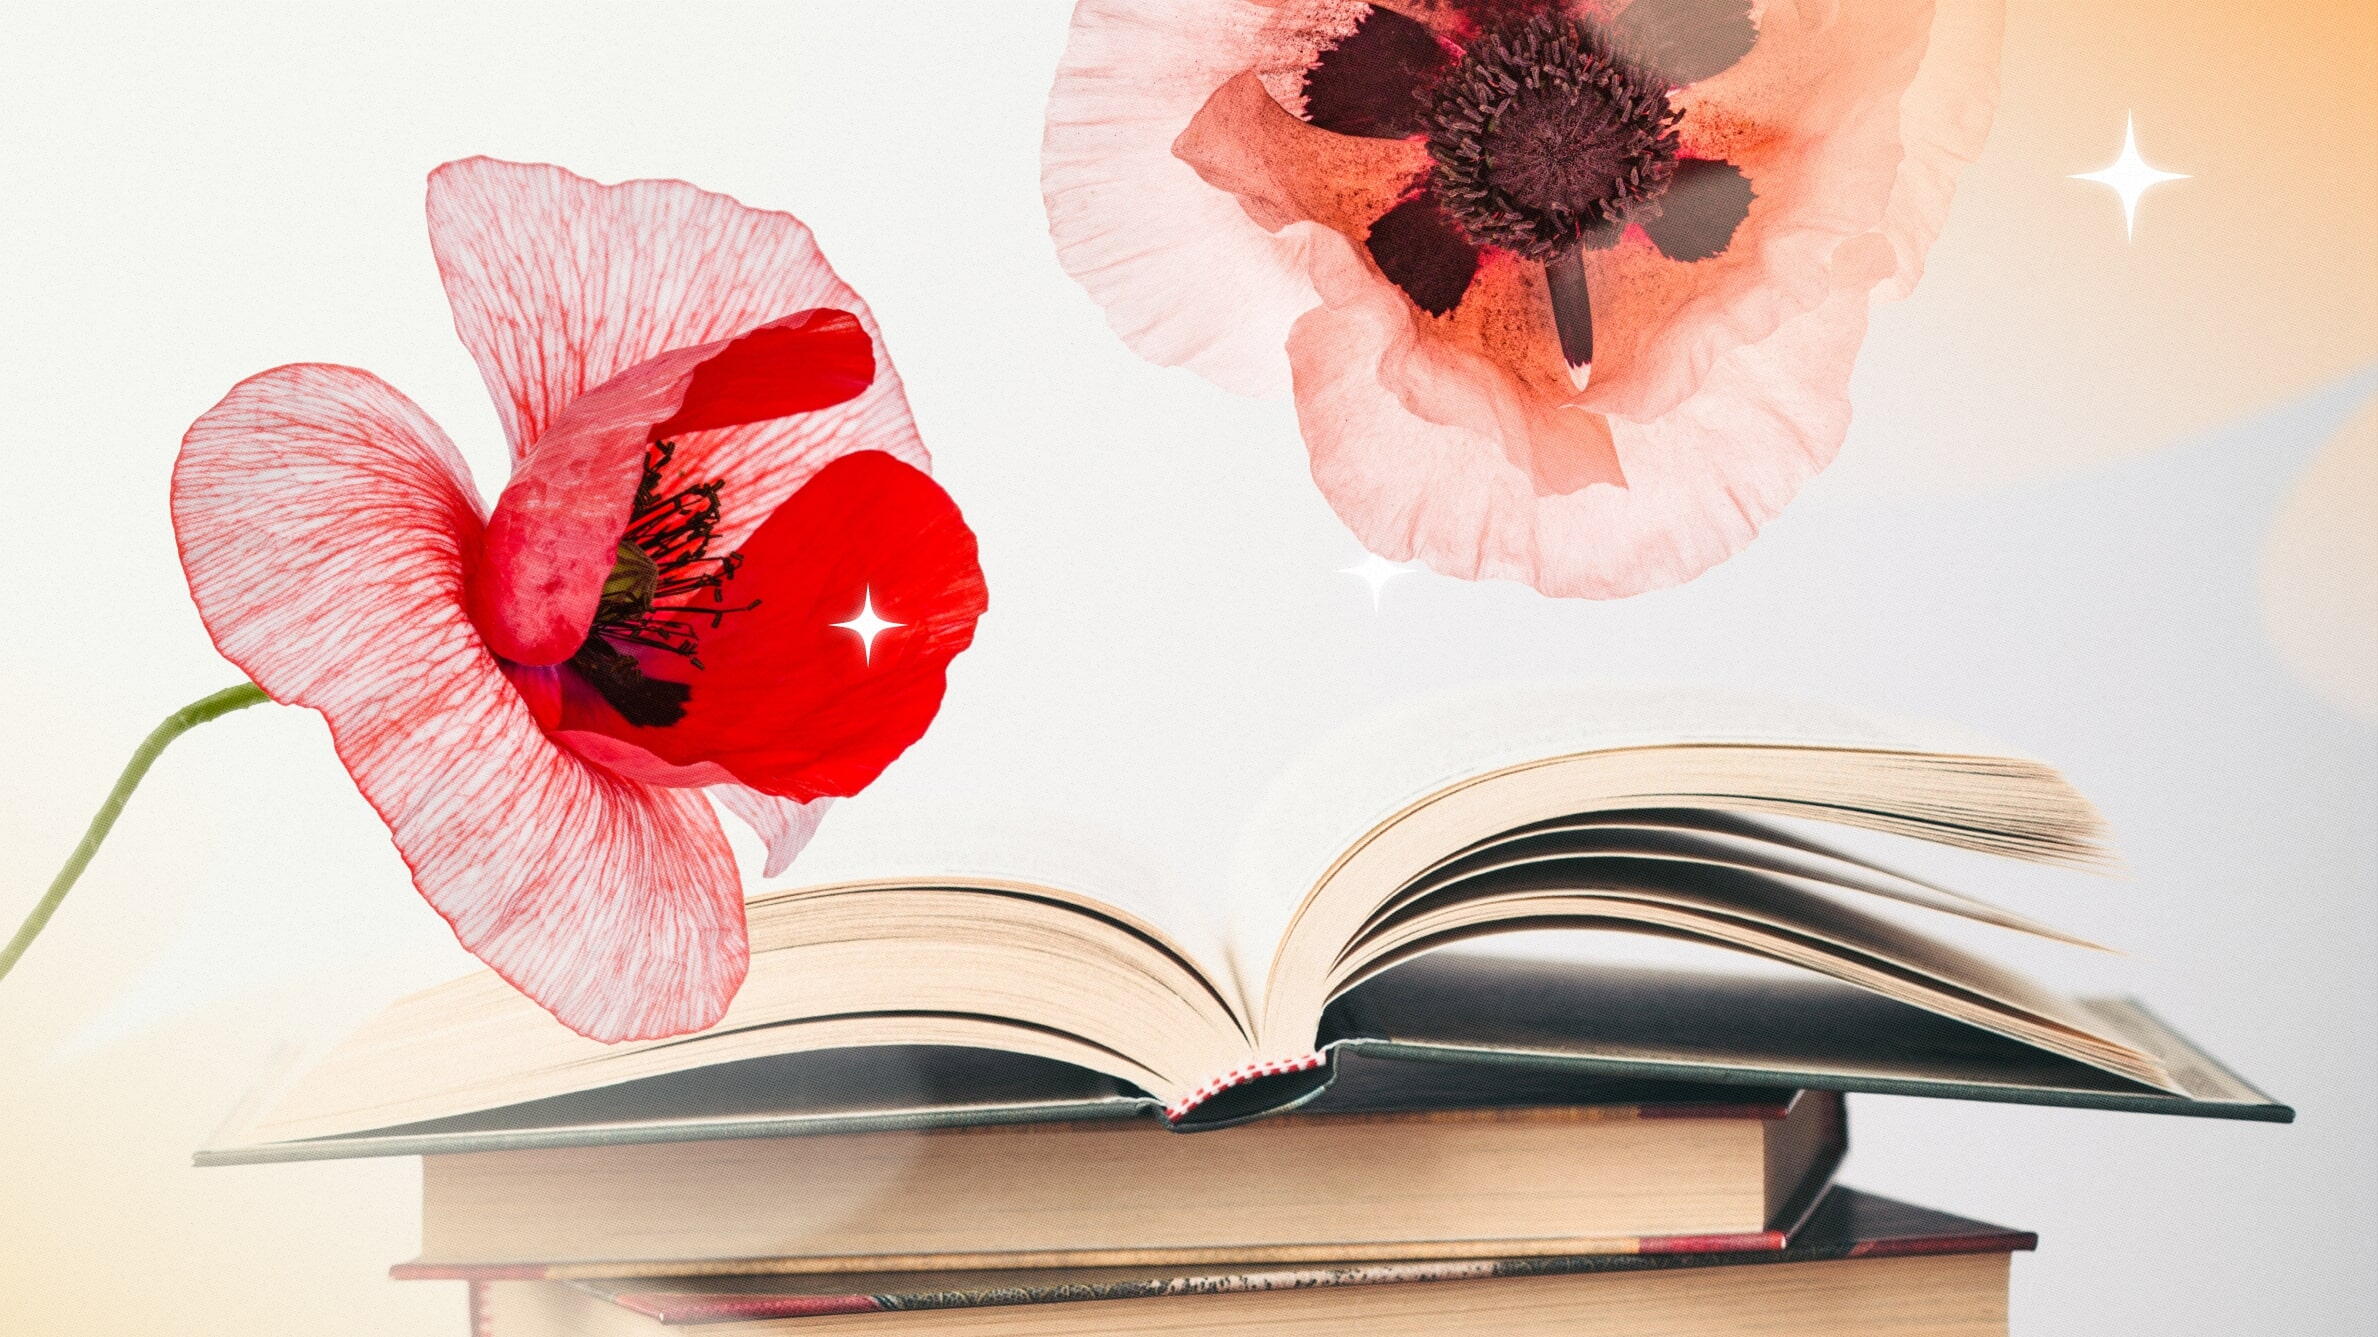 Historical Significance of Poppy Flowers